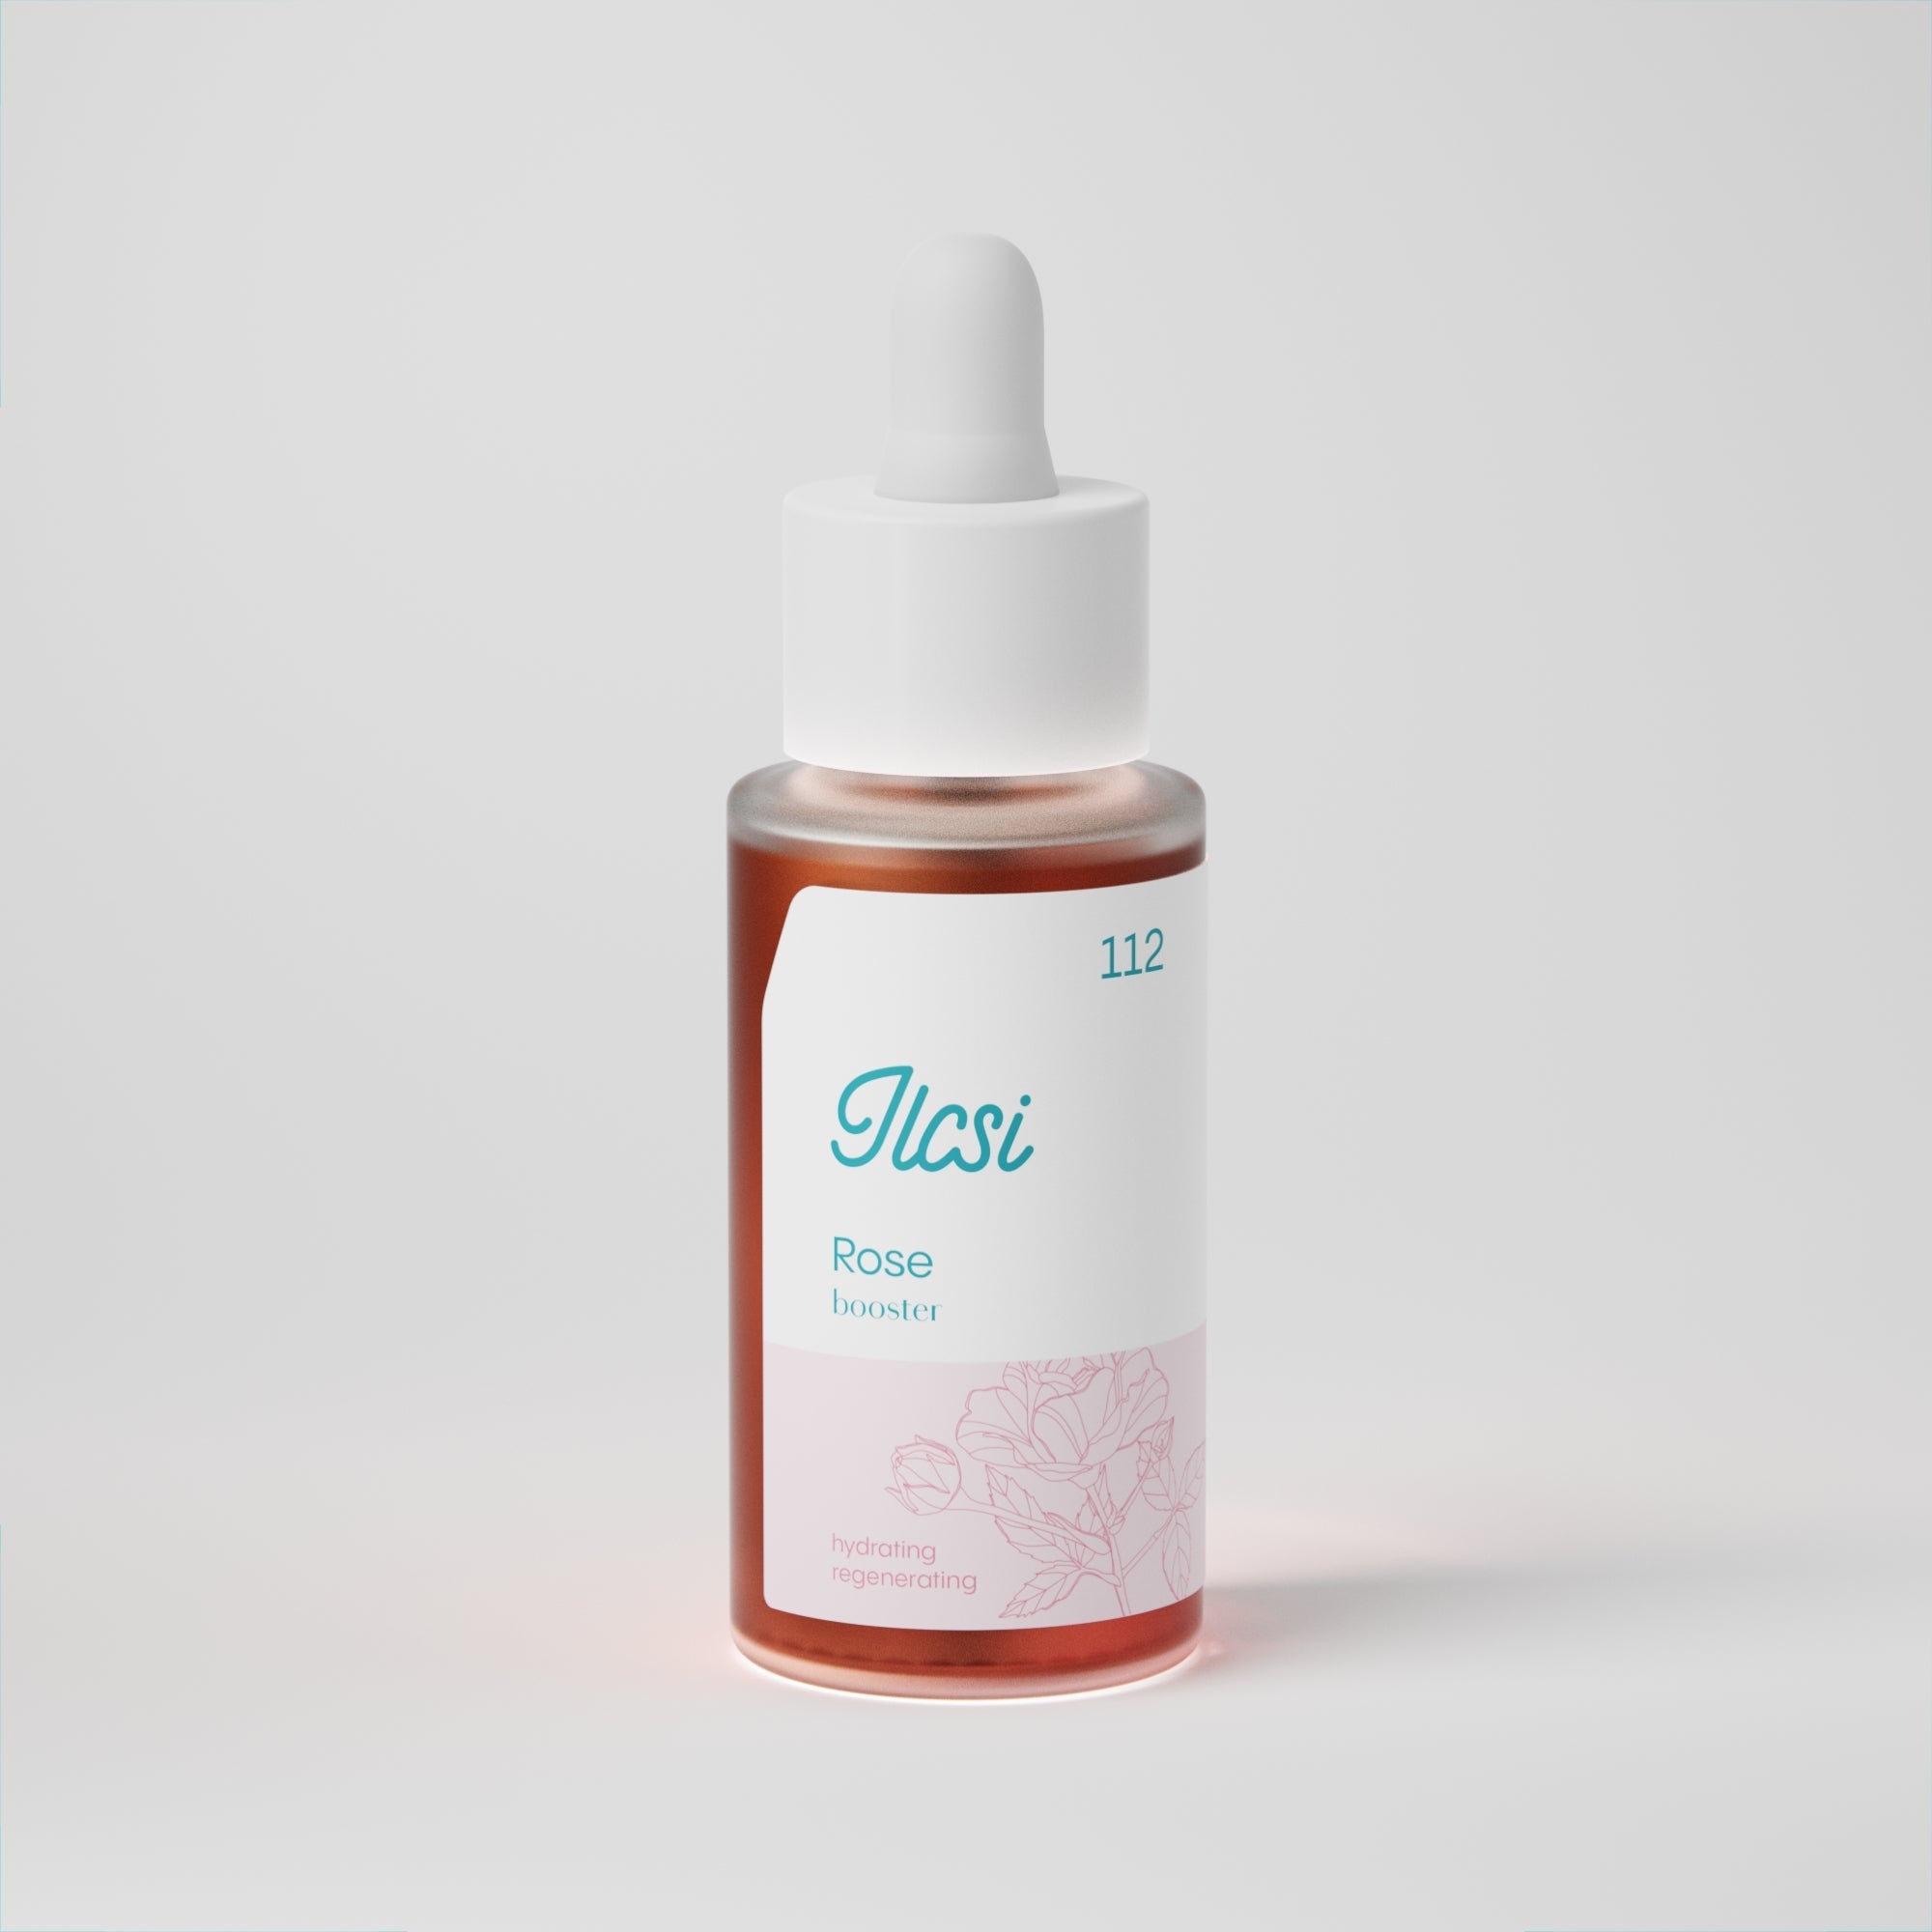 Rose booster 30 ml